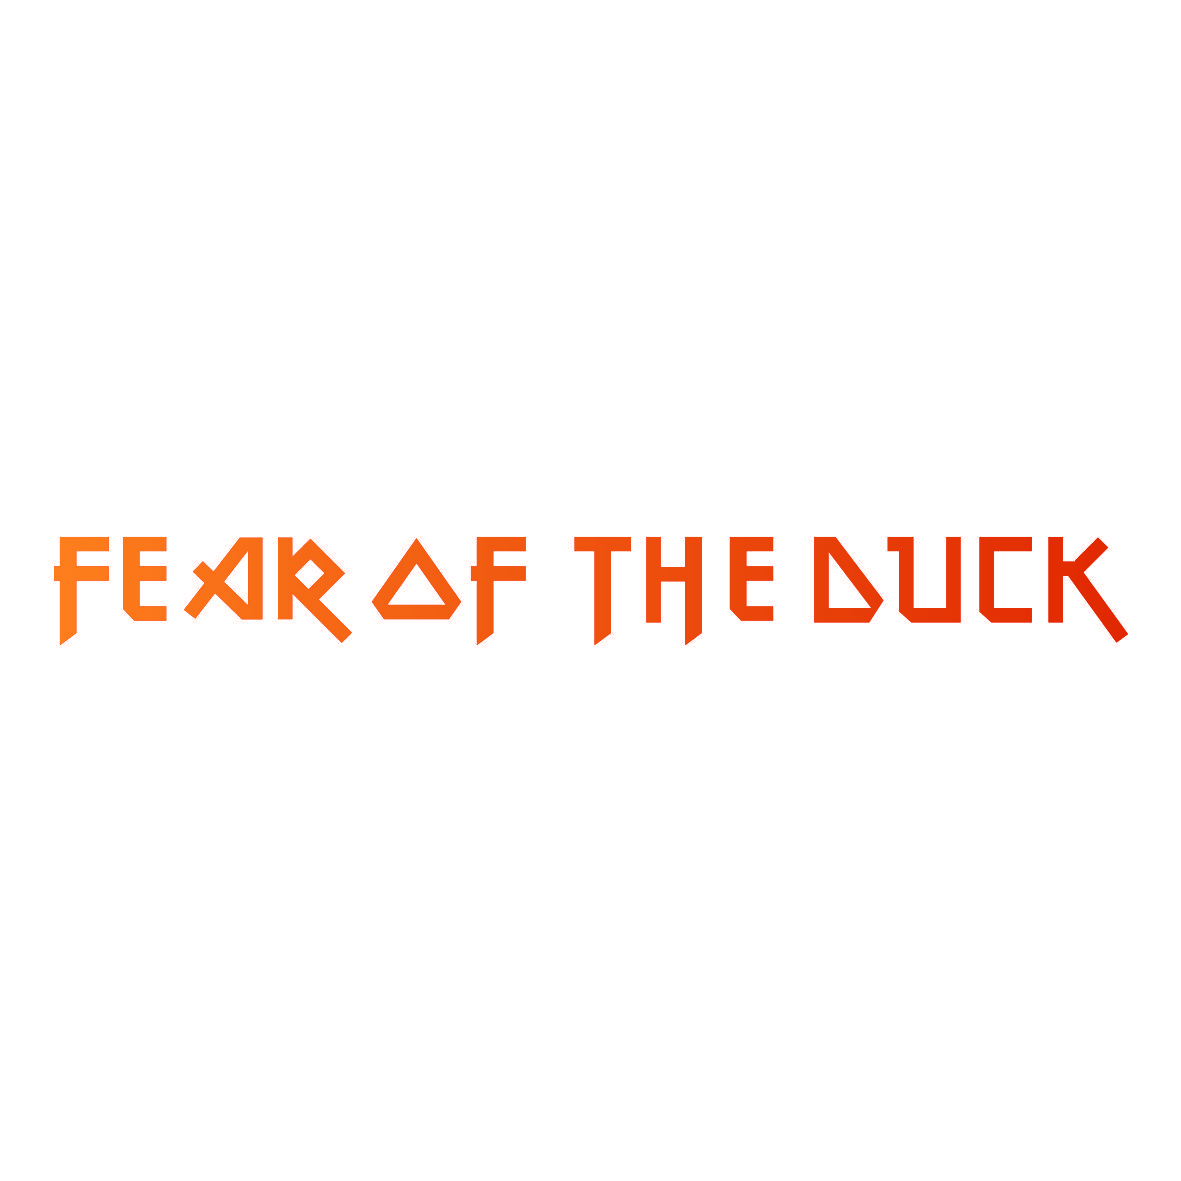 FEAR OF THE DUCK